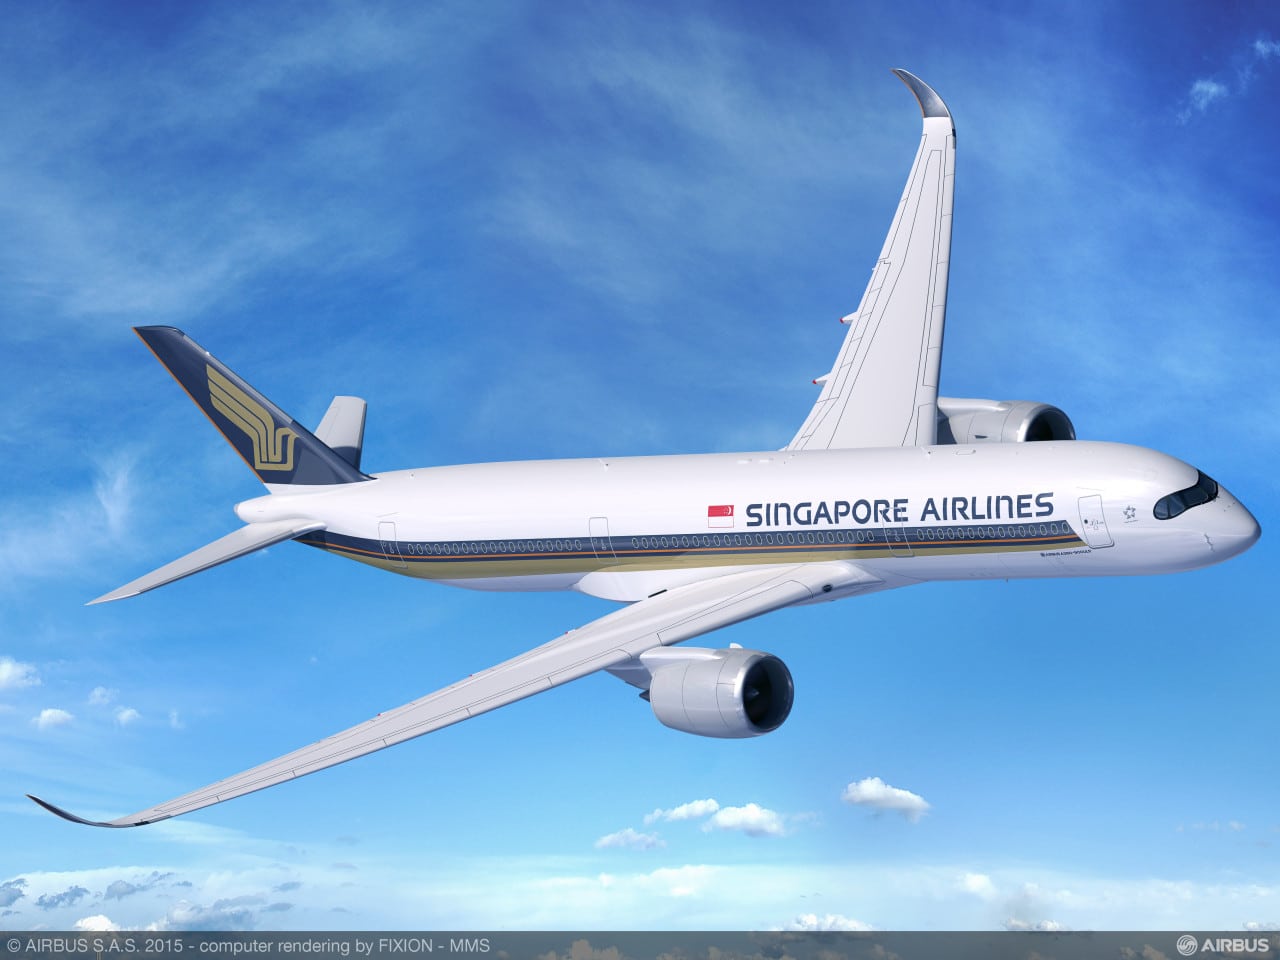 Singapore Airlines new A350-900ULR aircraft.